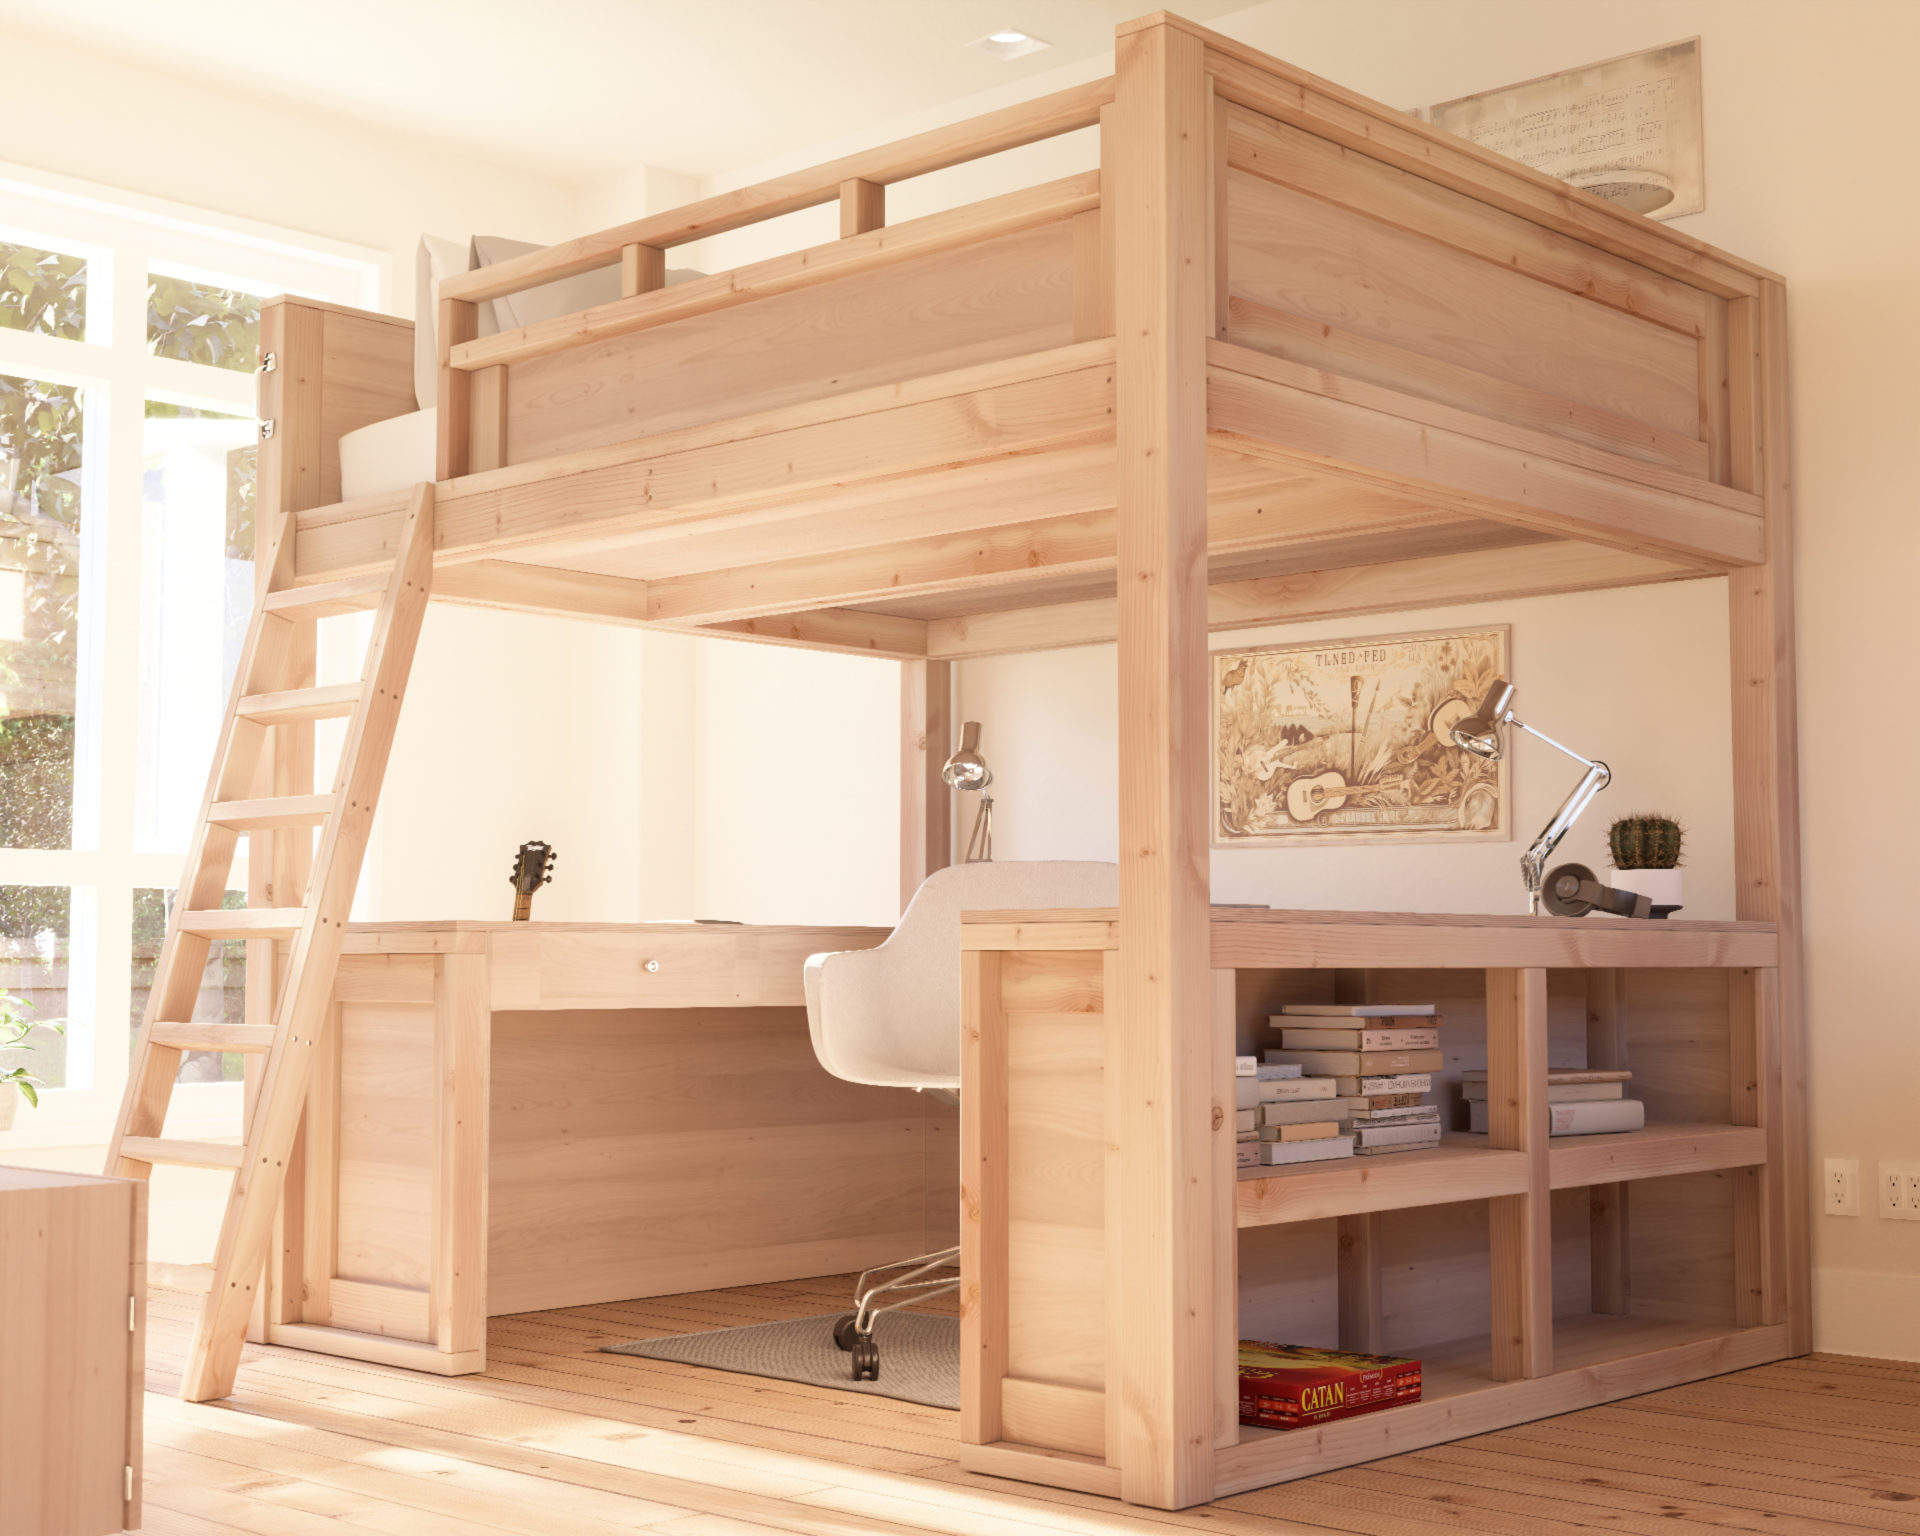 A Queen Loft Bed For Optimal Sleep And Study Step By Step Pdf Diy